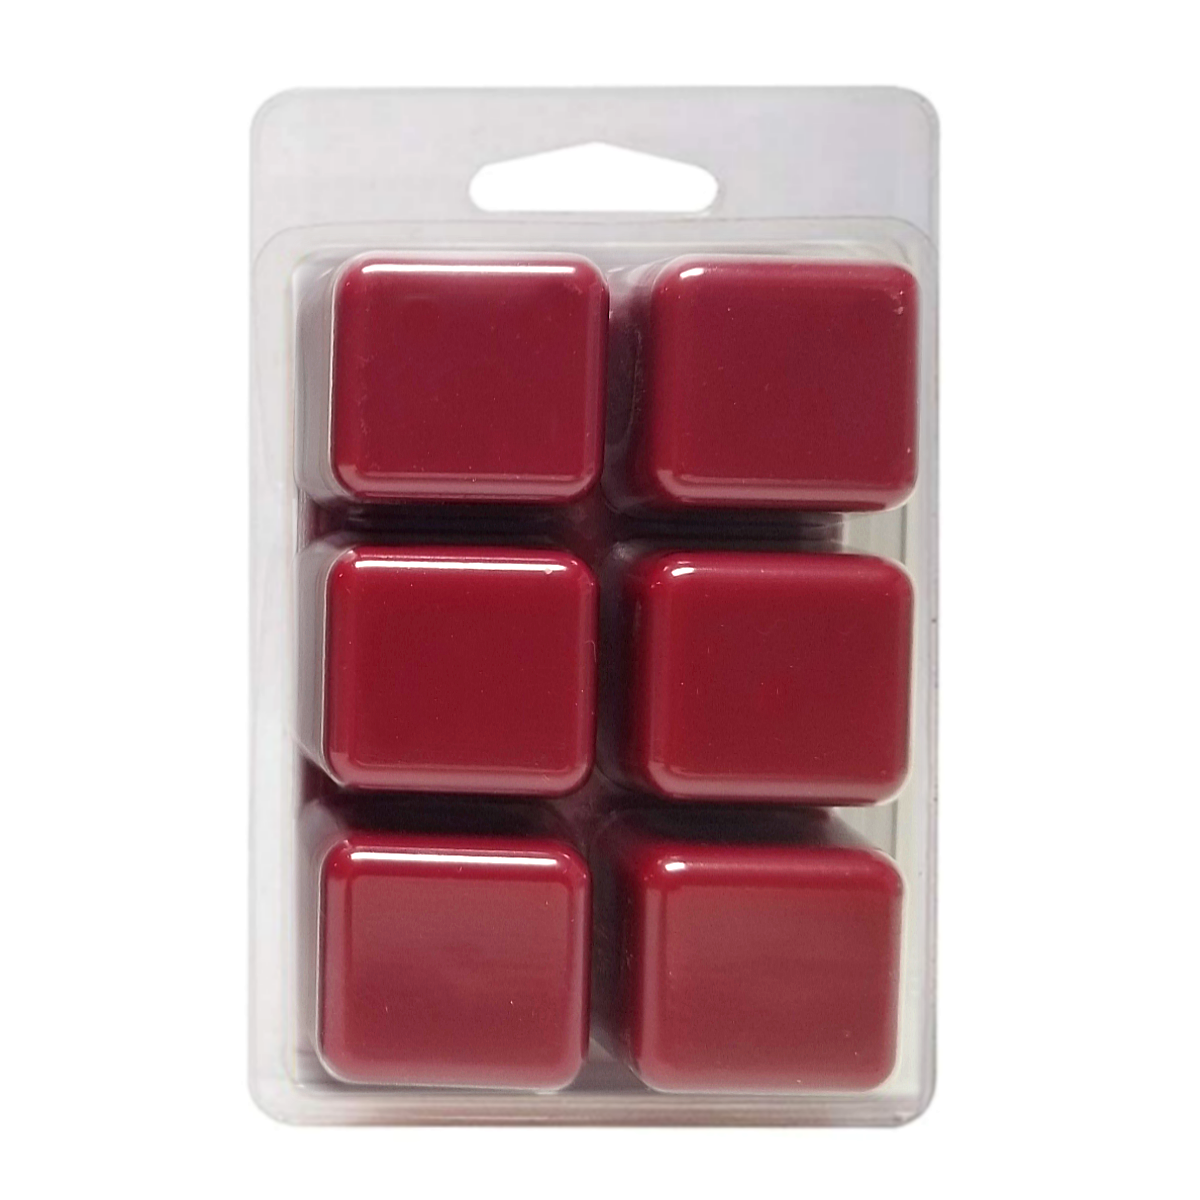 Cranberry Apple Marmalade - 3.2 oz Clamshell